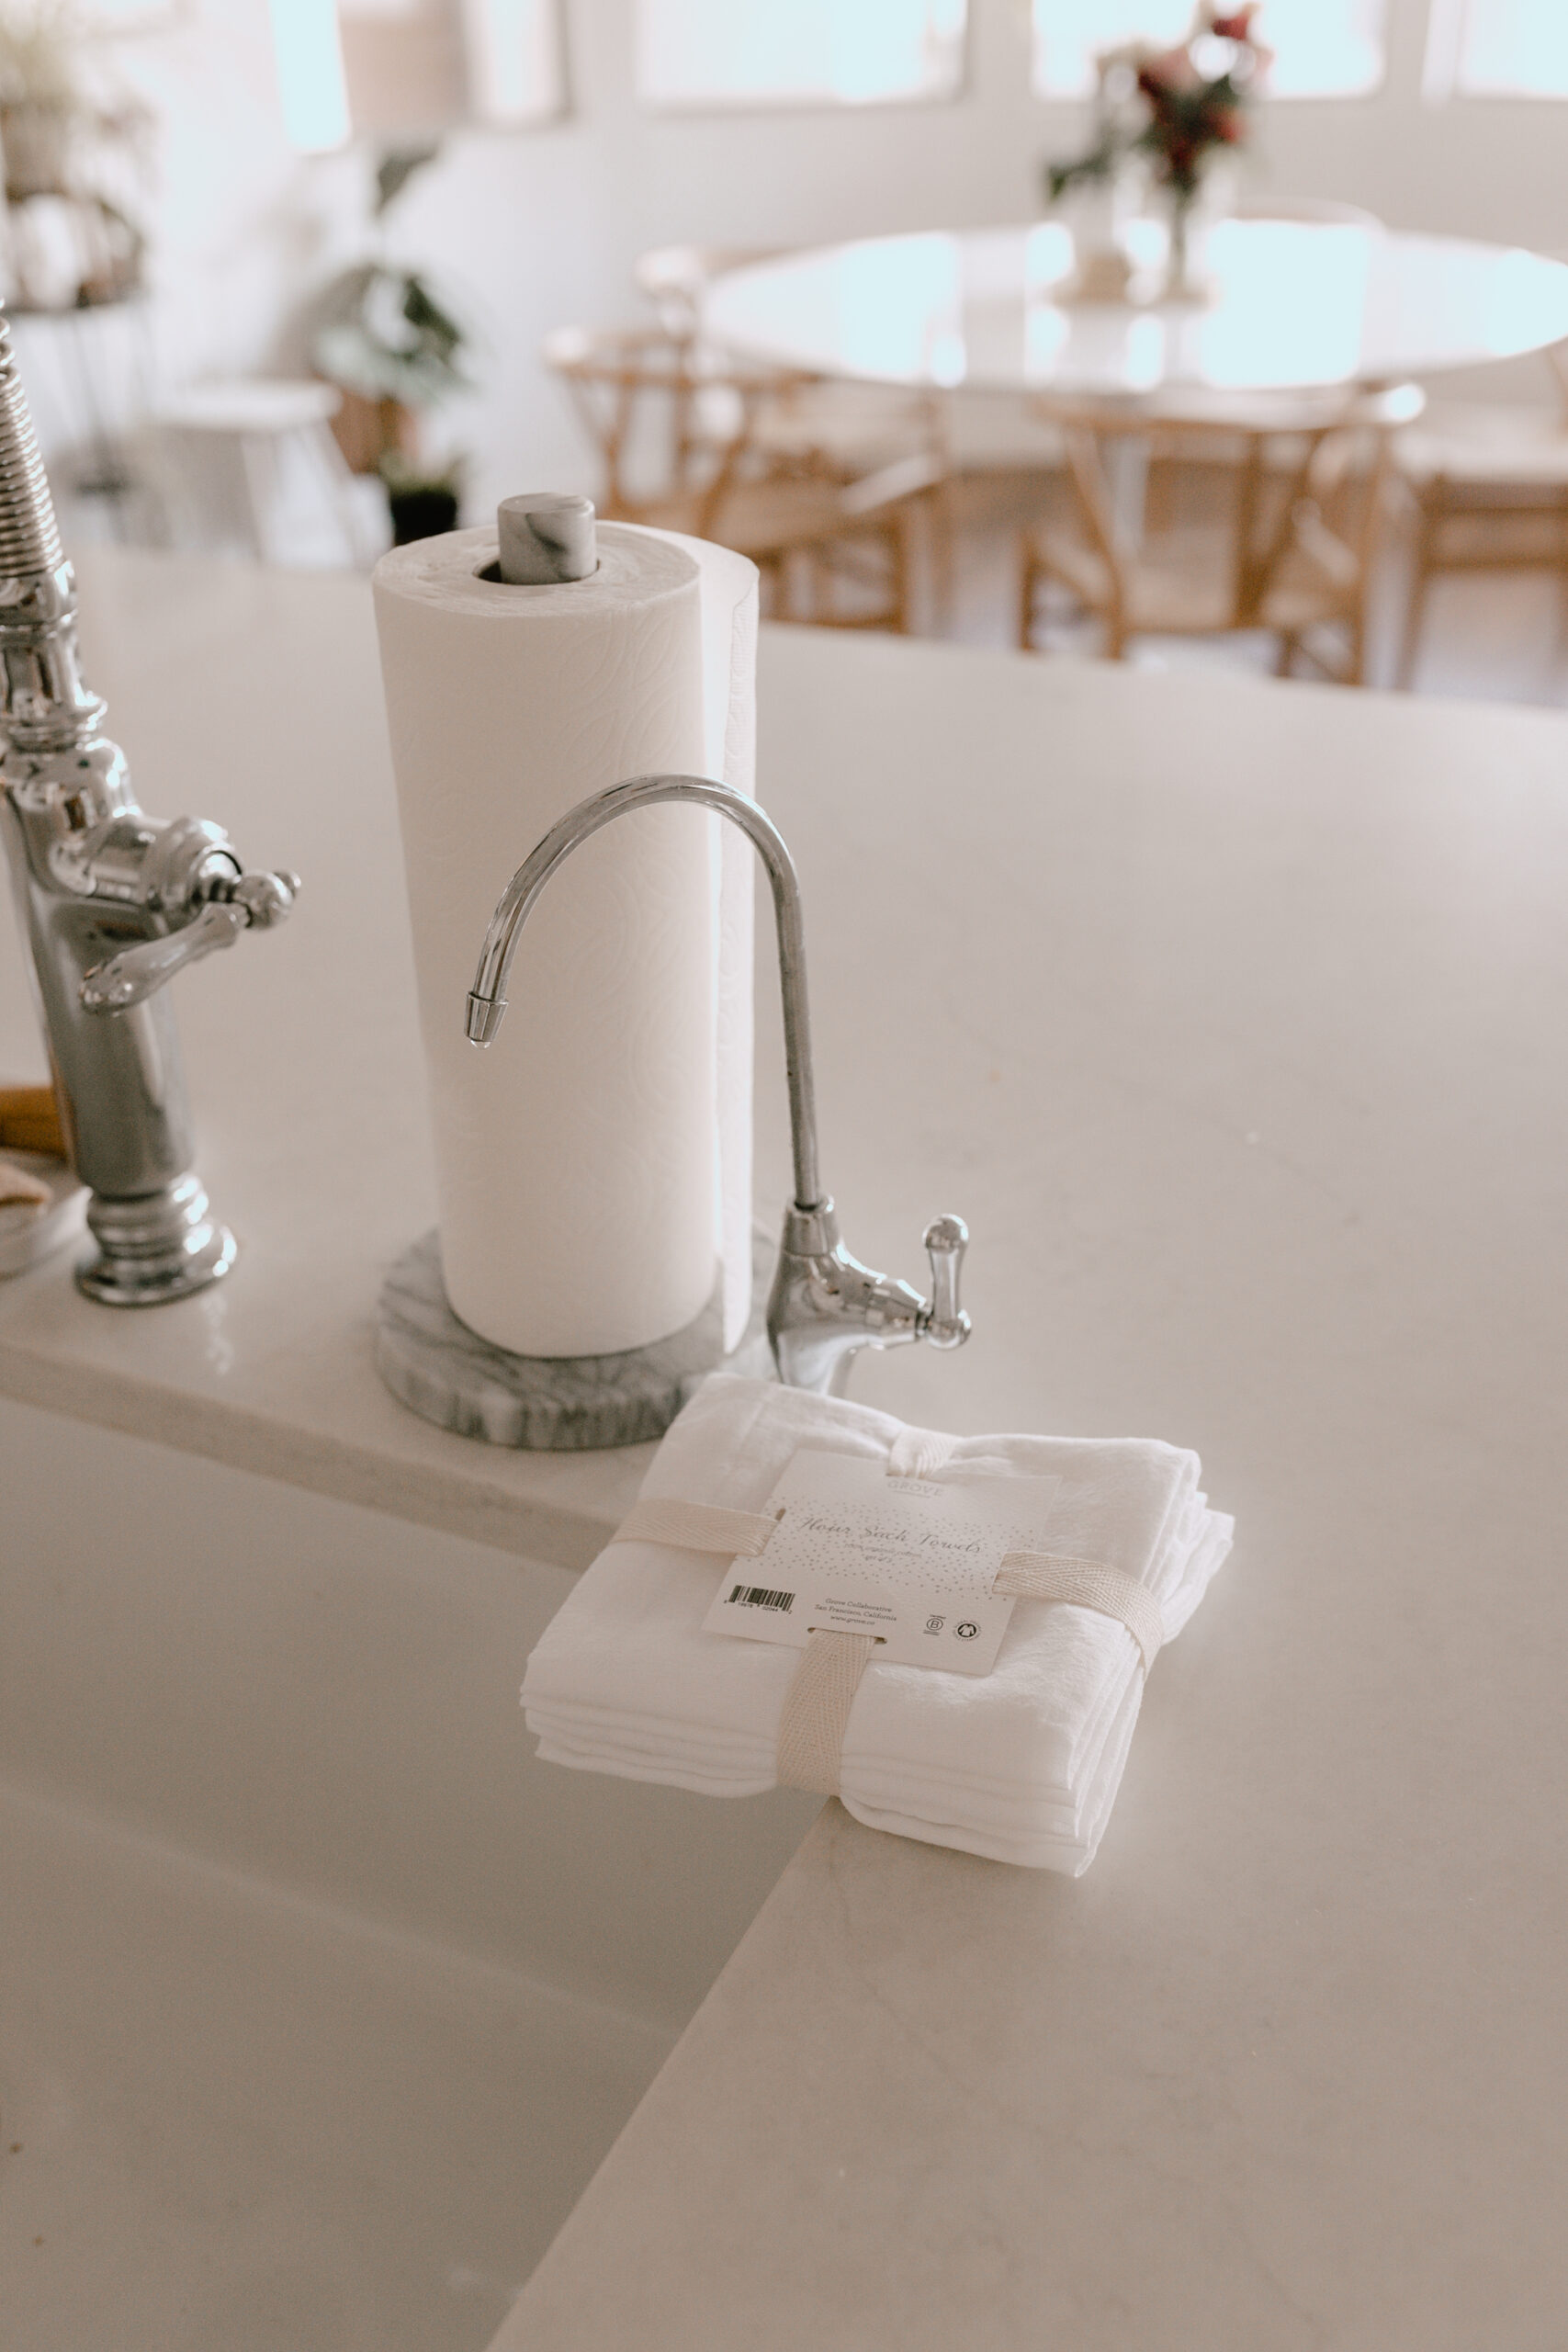 swap out paper towels for flour sack towels. #sustainableliving #greenliving #lesswaste